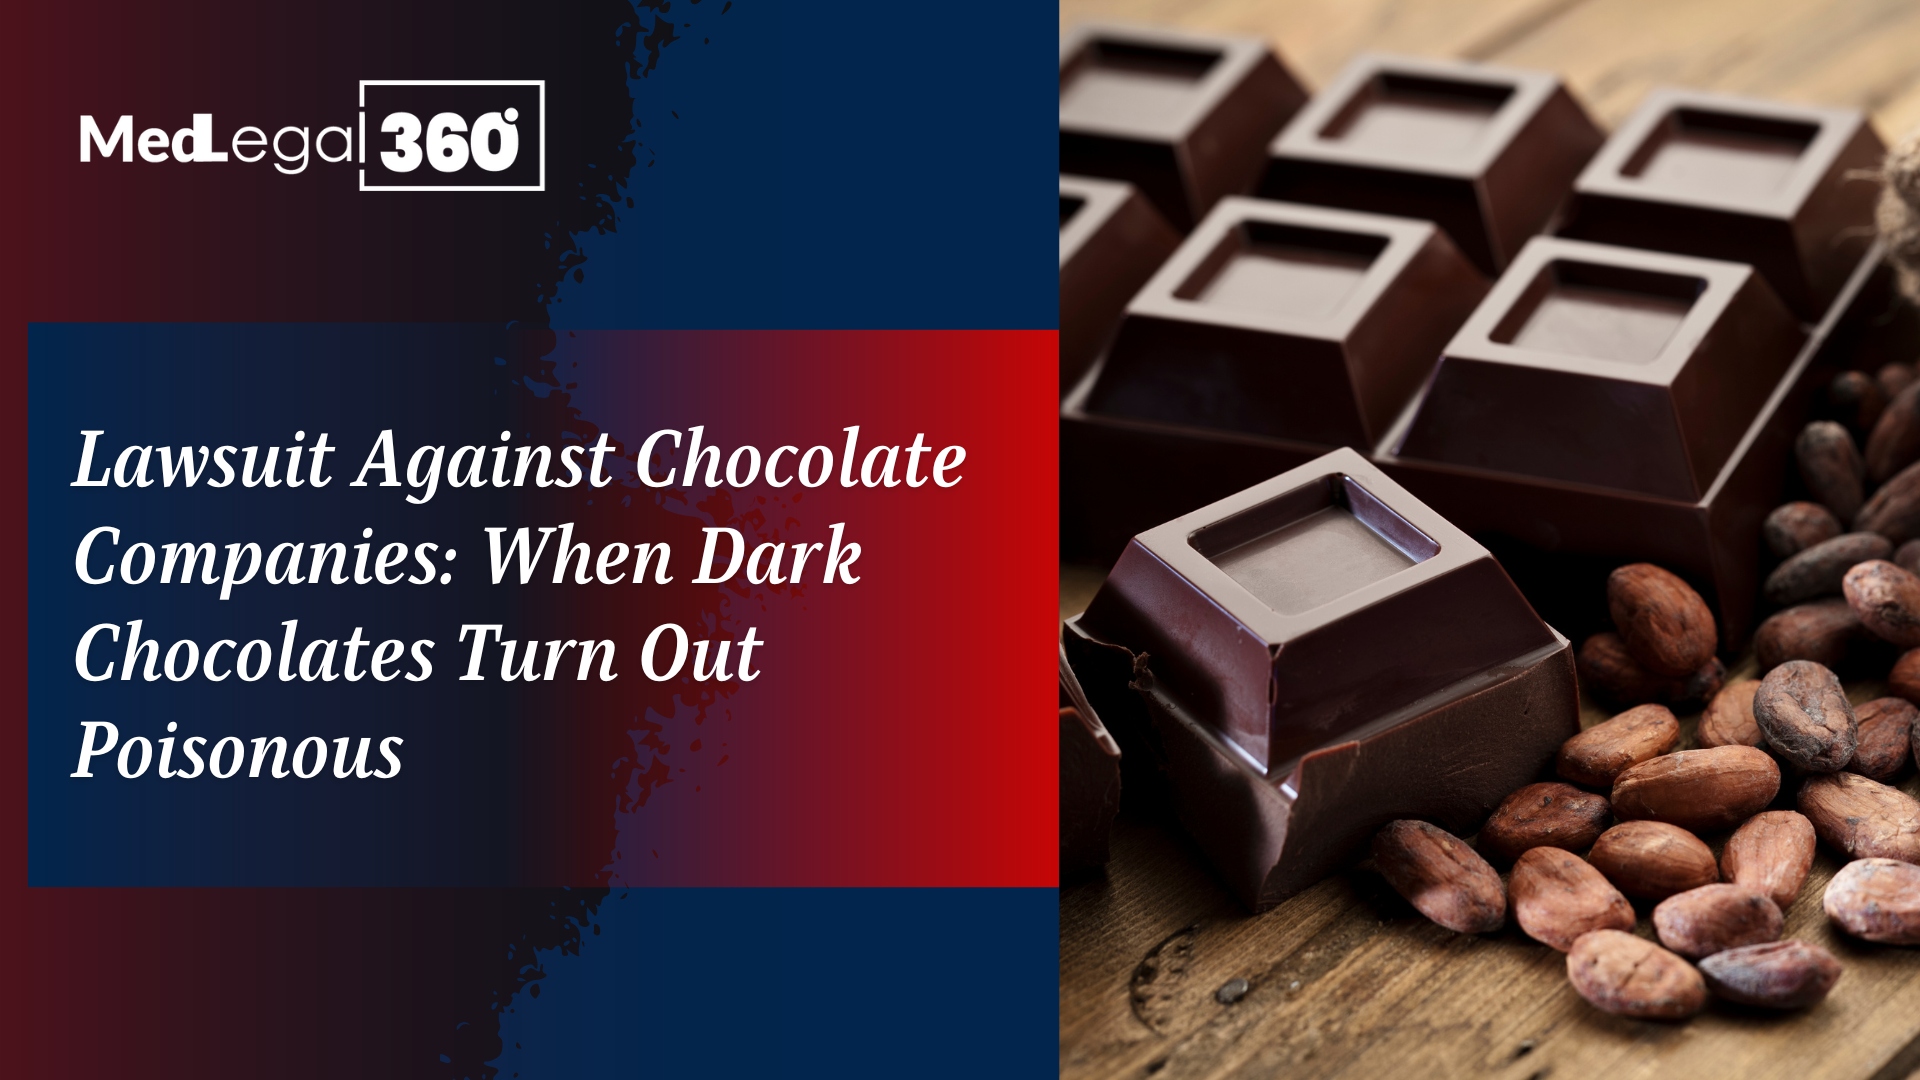 Lawsuit Against Chocolate Companies: When Dark Chocolates Turn Out Poisonous